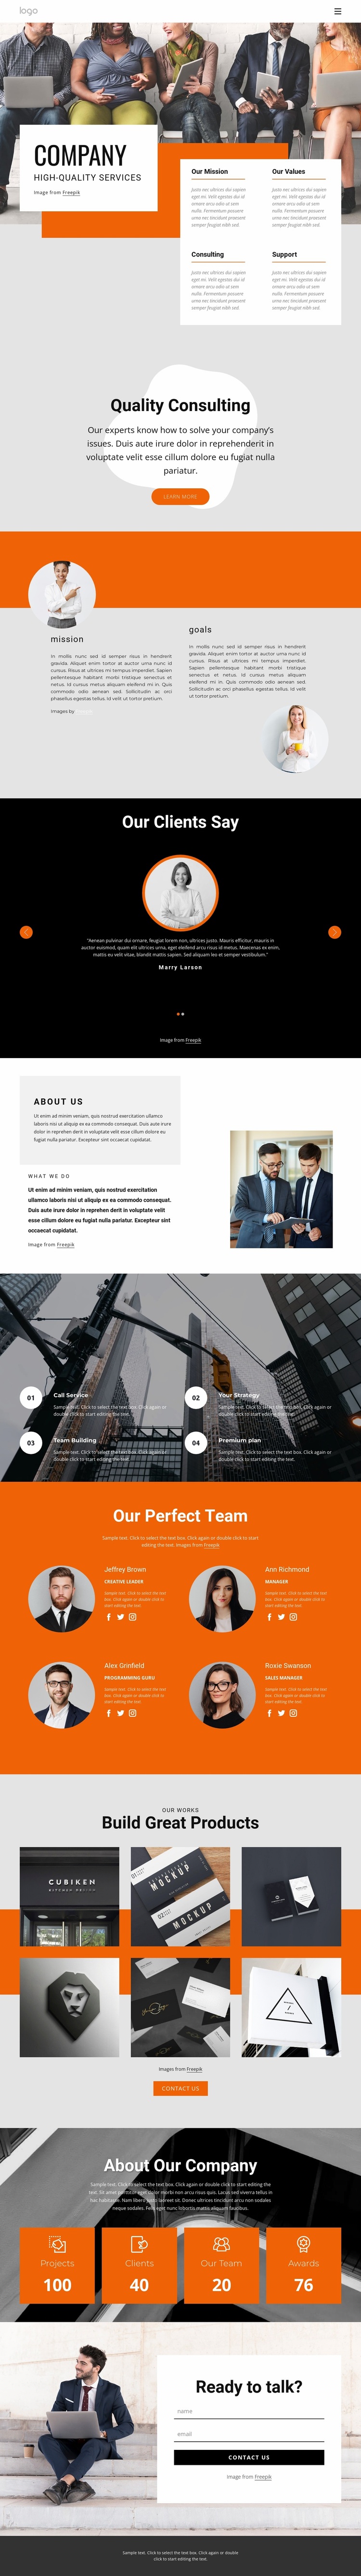 Hight quality consulting firm Website Design